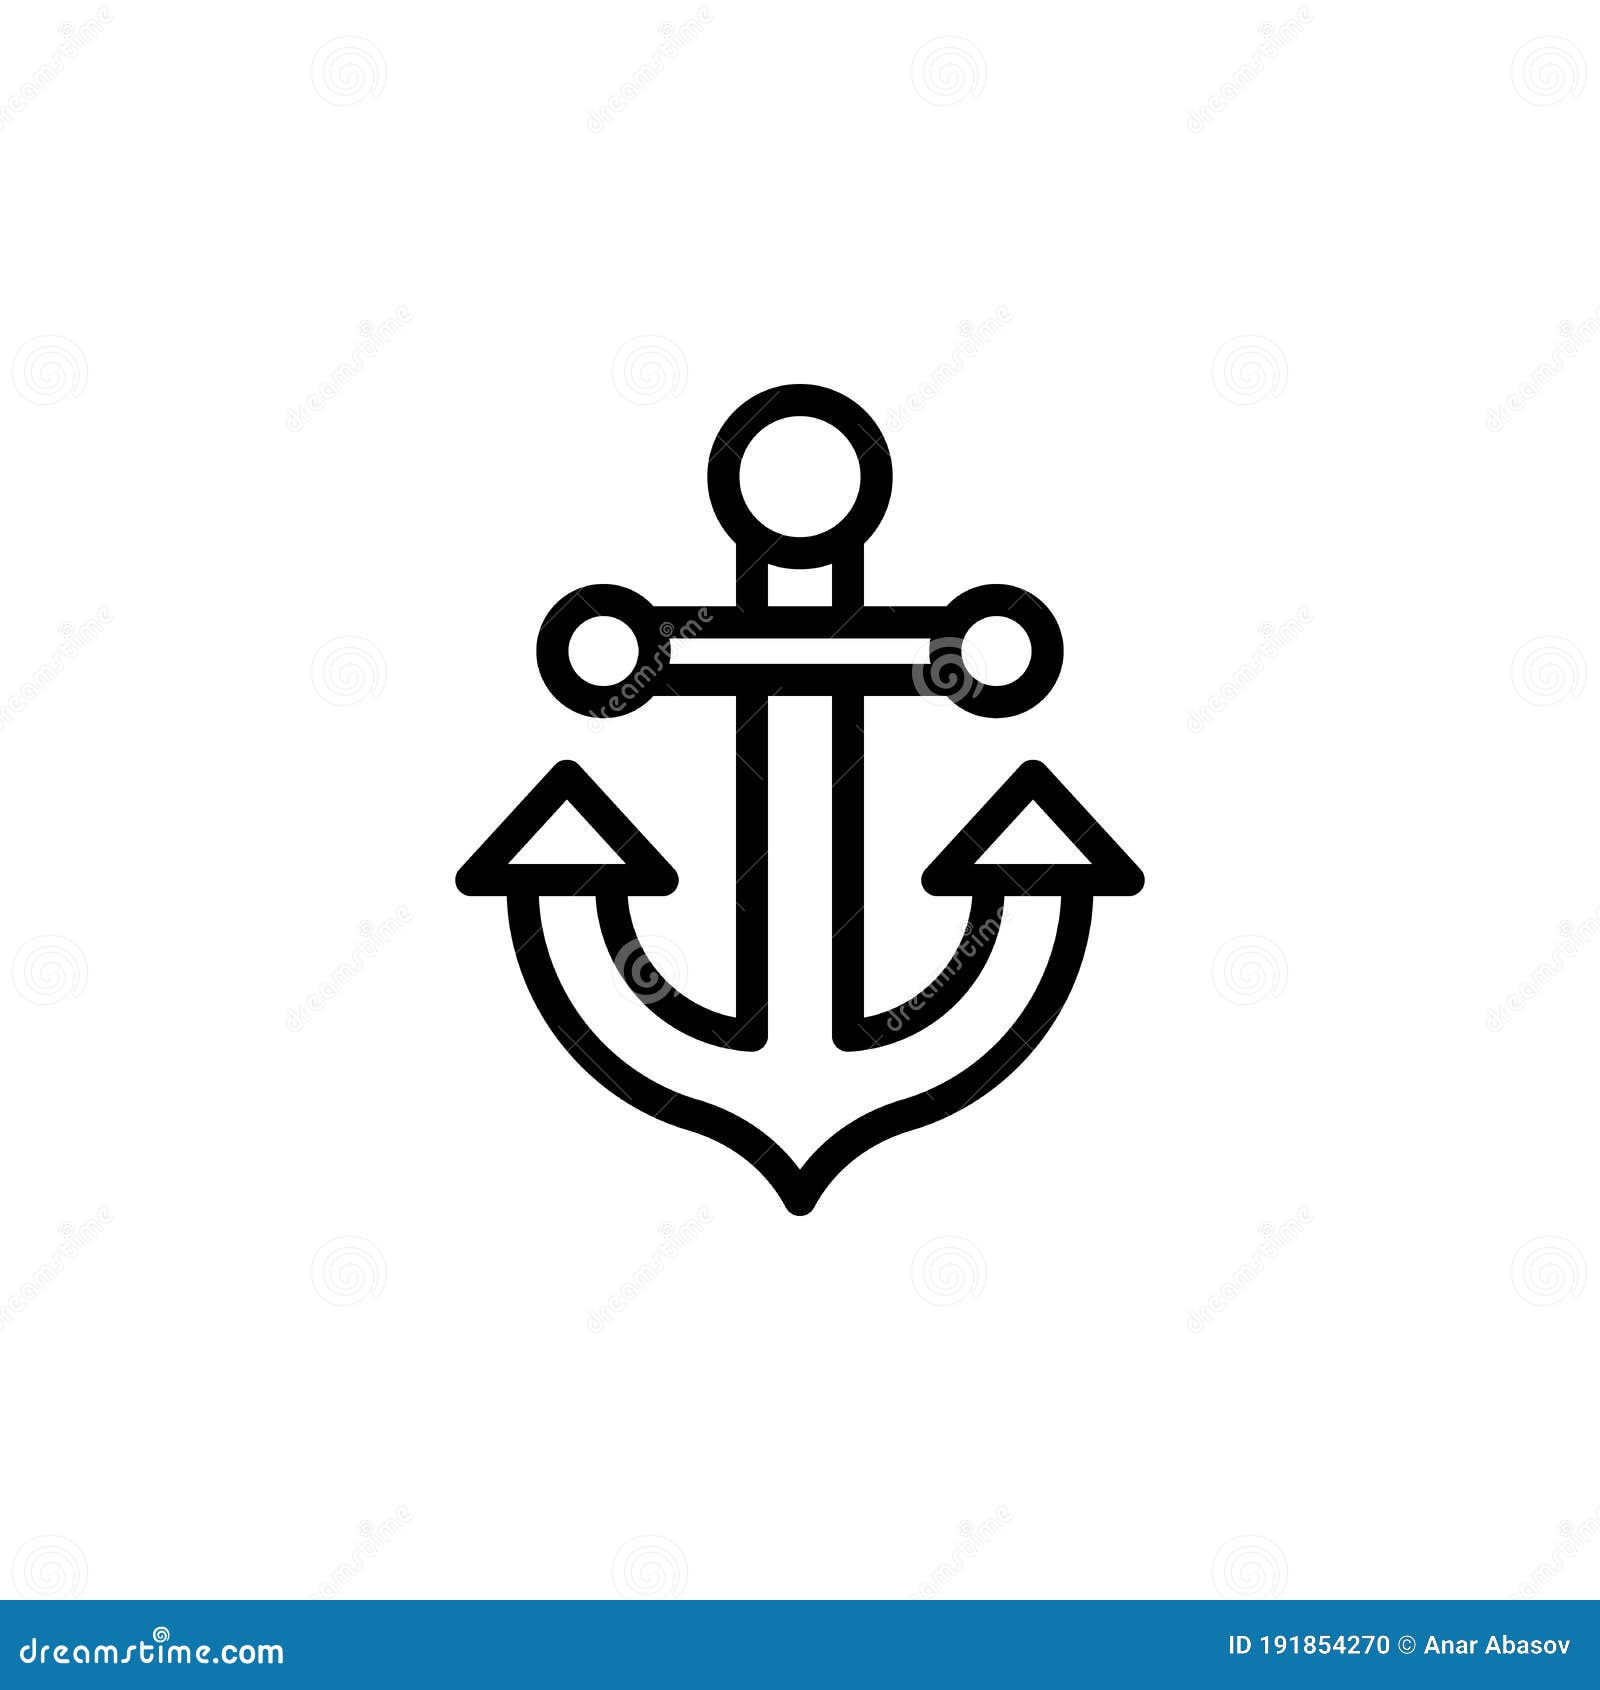 Sea Anchor Tattoo in the Traditional Style Stock Vector - Illustration of  marine, decorative: 154498135